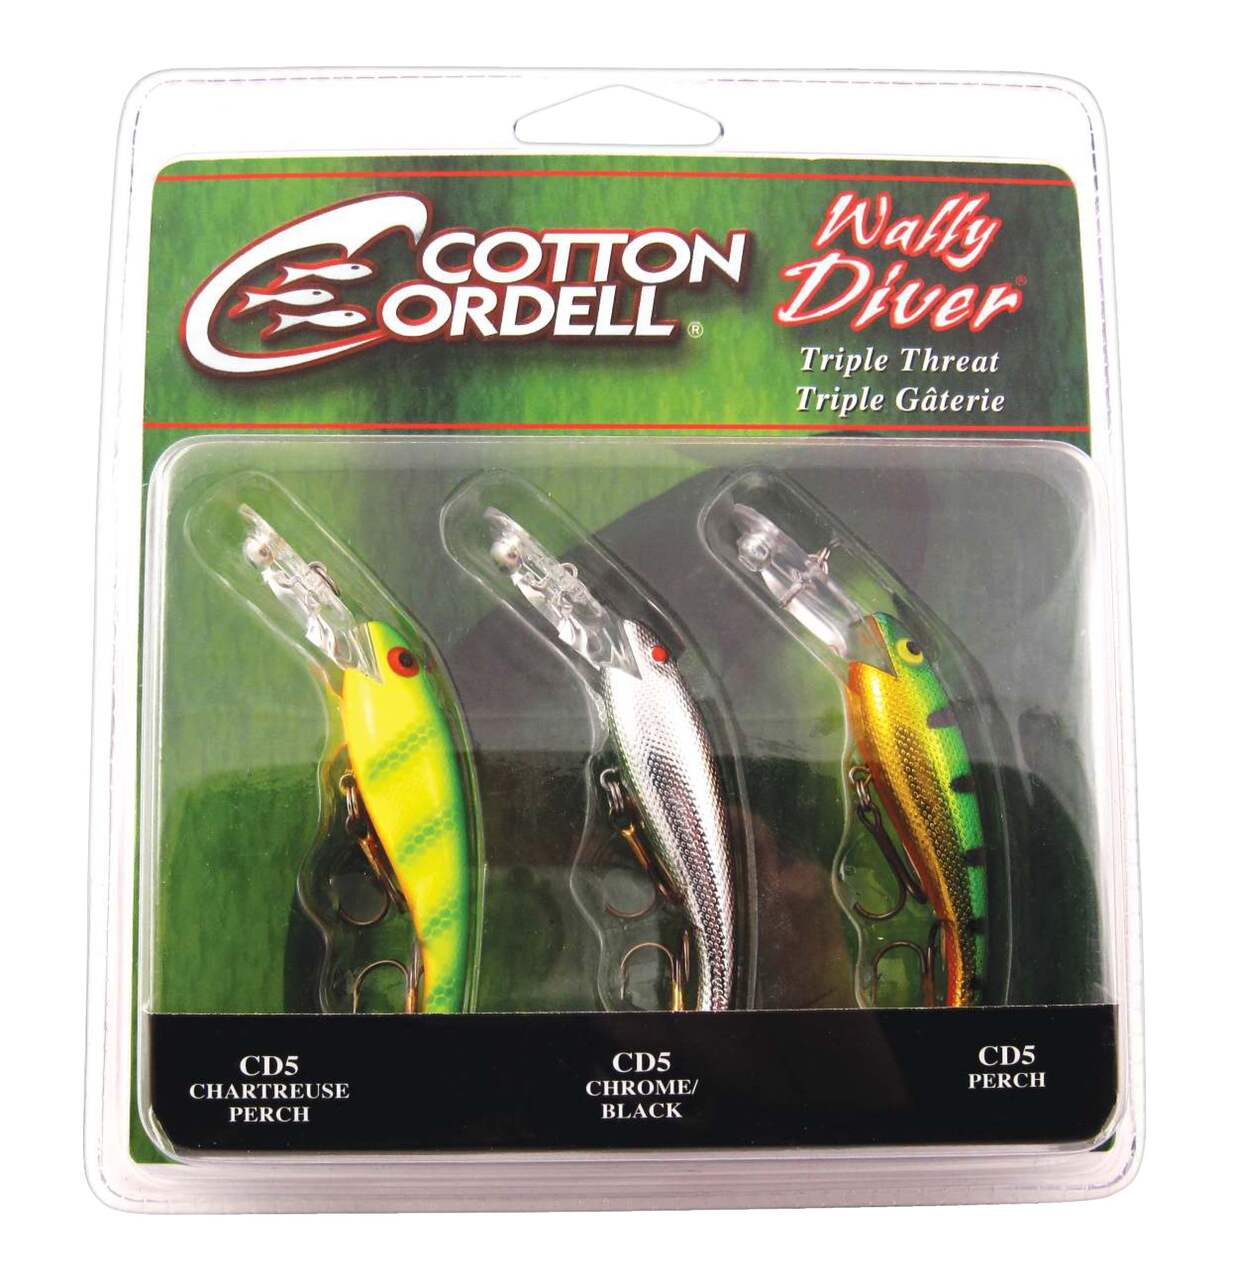 COTTON CORDELL DEEP Jointed Crankbait Wobbler Wally Diver Foxy